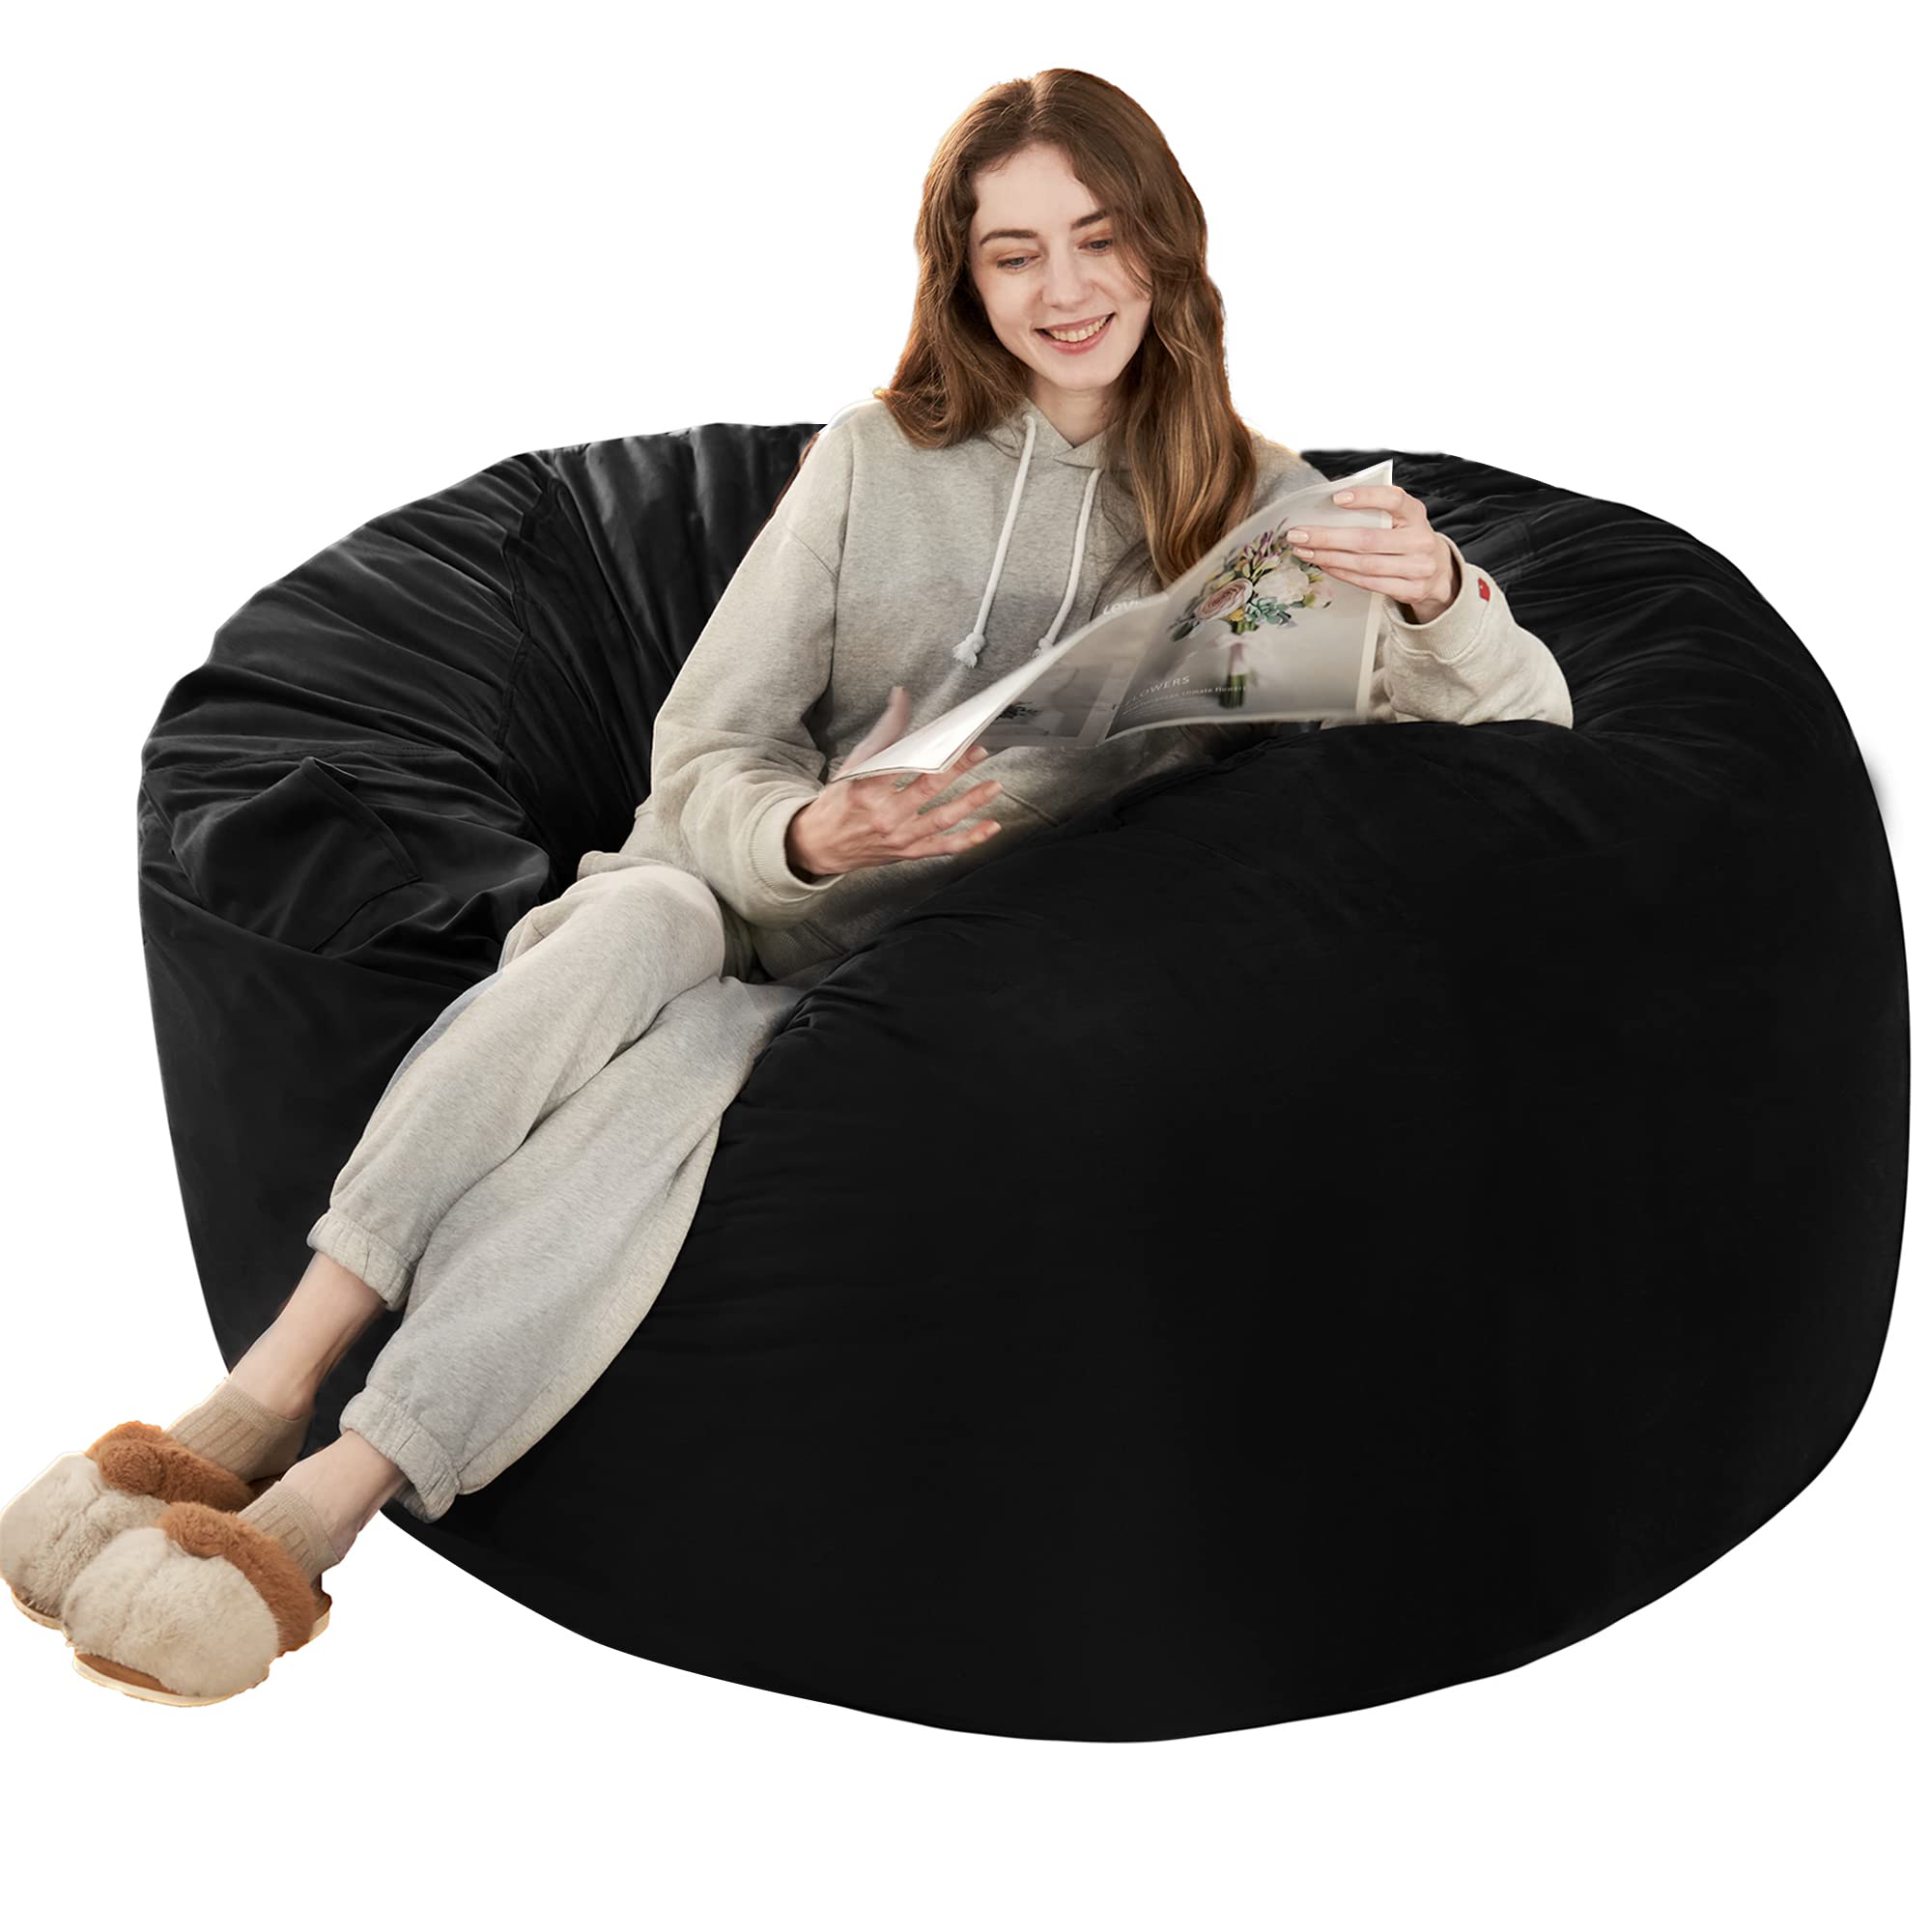 HABUTWAY Bean Bag Chair: Giant 4' Memory Foam Furniture Bean Bag Chairs for Adults with Microfiber Cover - 4Ft, Black